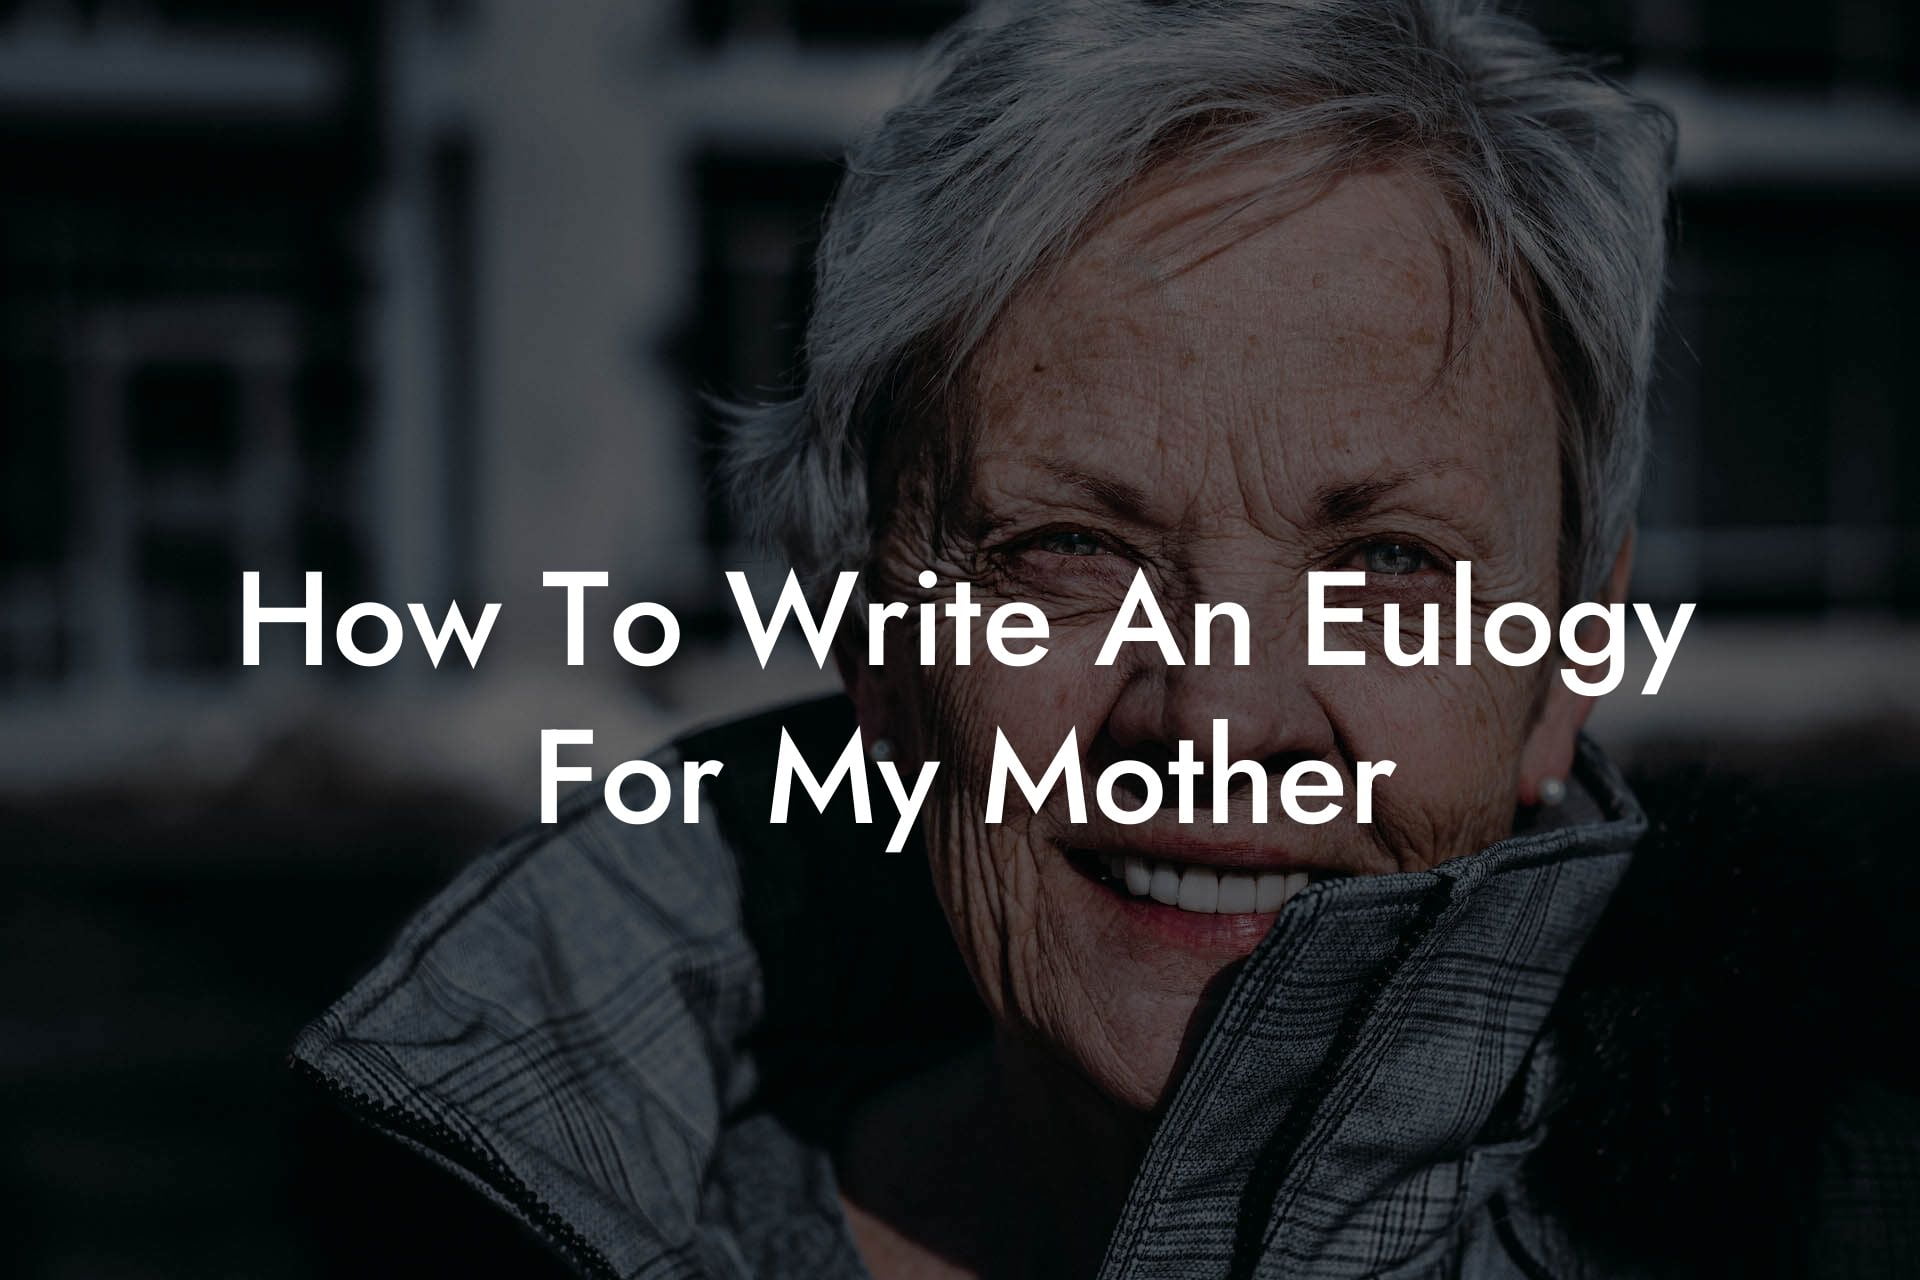 How To Write An Eulogy For My Mother